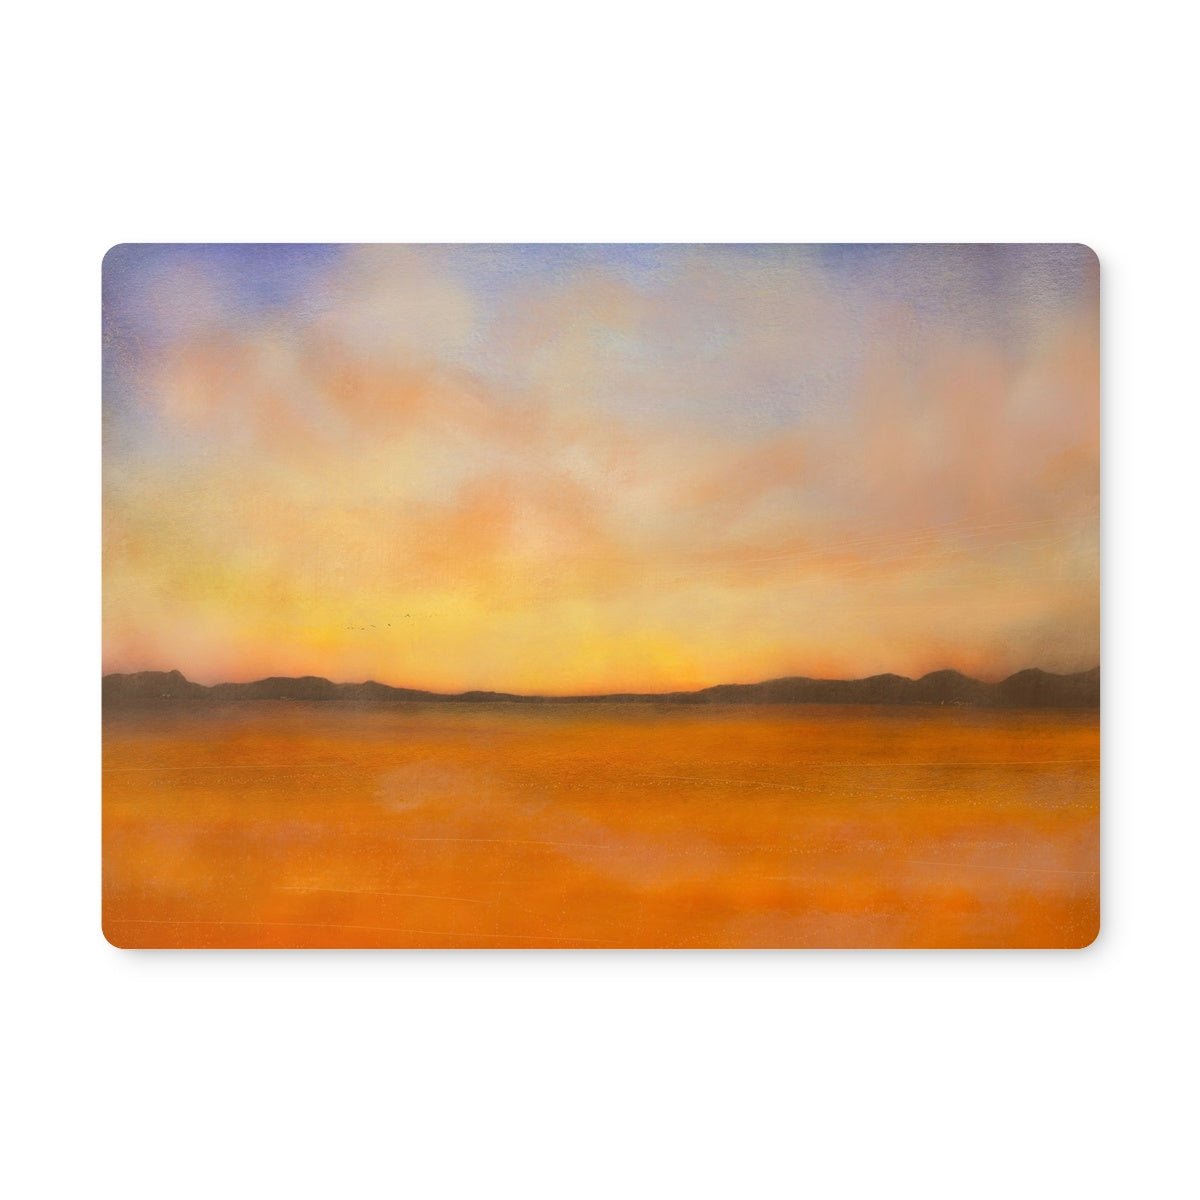 Islay Dawn Art Gifts Placemat-Placemats-Hebridean Islands Art Gallery-6 Placemats-Paintings, Prints, Homeware, Art Gifts From Scotland By Scottish Artist Kevin Hunter